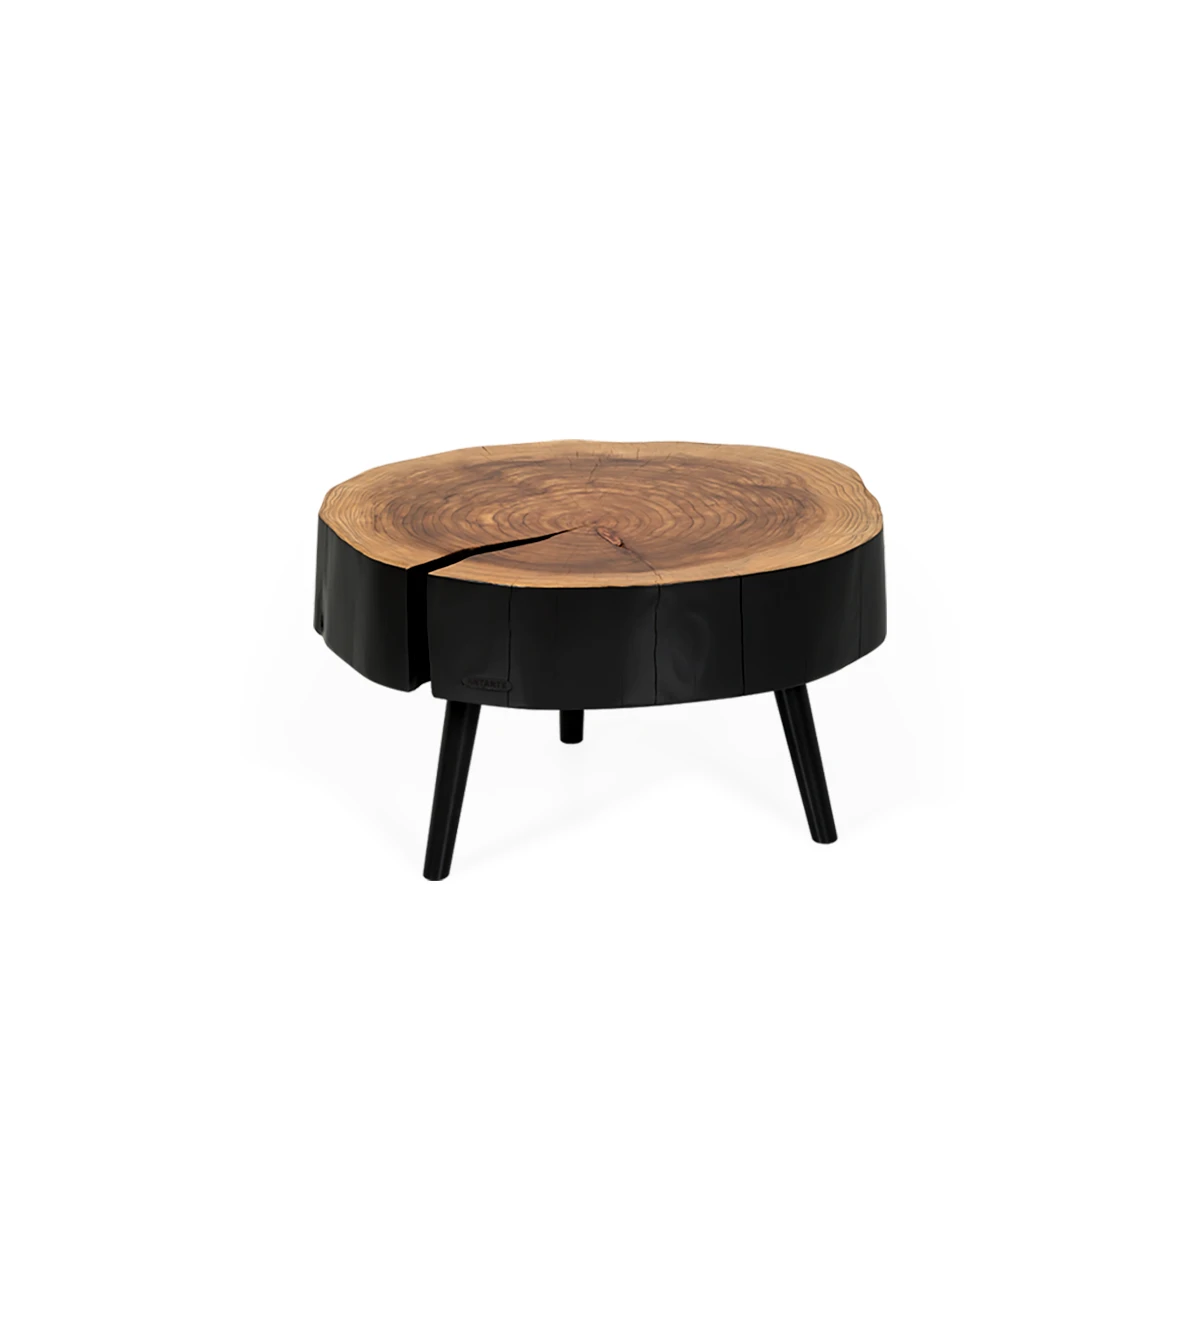 Trunk center table in natural cryptomeria wood lacquered in black, black lacquered feet, Ø 60 to 75 cm.